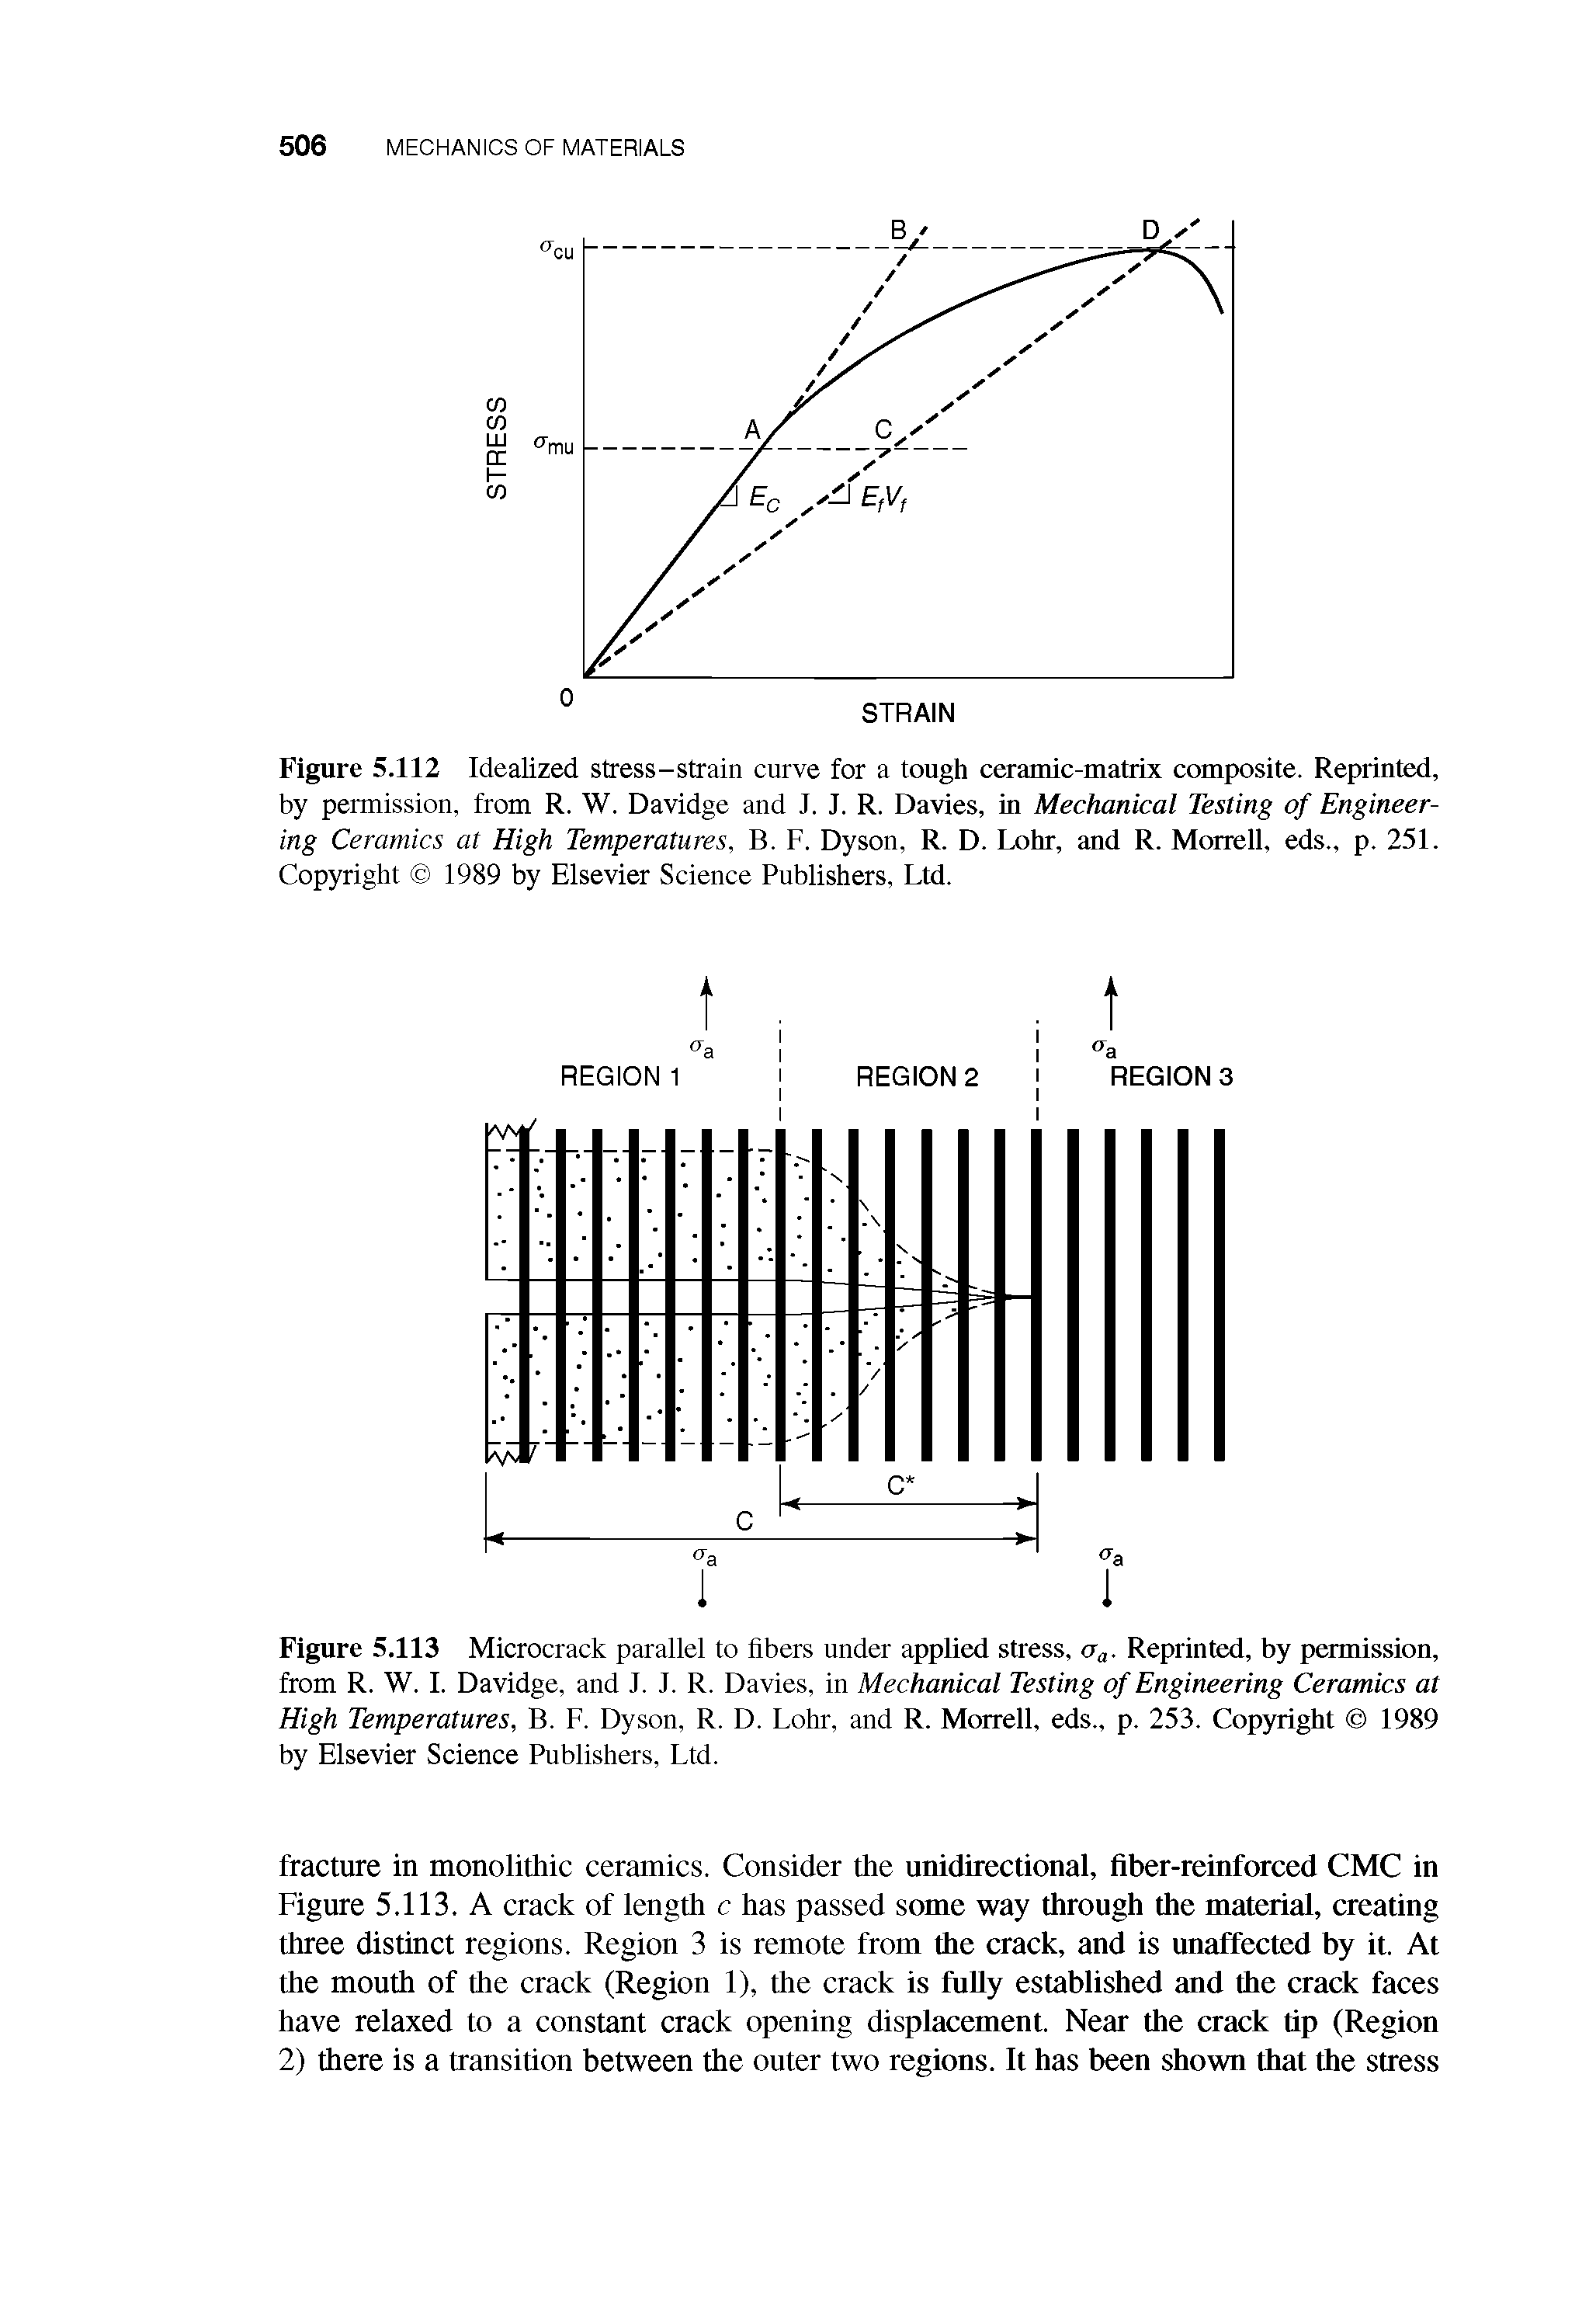 Figure 5.112 Idealized stress-strain curve for a tough ceramic-matrix composite. Reprinted, by permission, from R. W. Davidge and 1. J. R. Davies, in Mechanical Testing of Engineering Ceramics at High Temperatures, B. F. Dyson, R. D. Lohr, and R. Morrell, eds., p. 251. Copyright 1989 by Elsevier Science Publishers, Ltd.